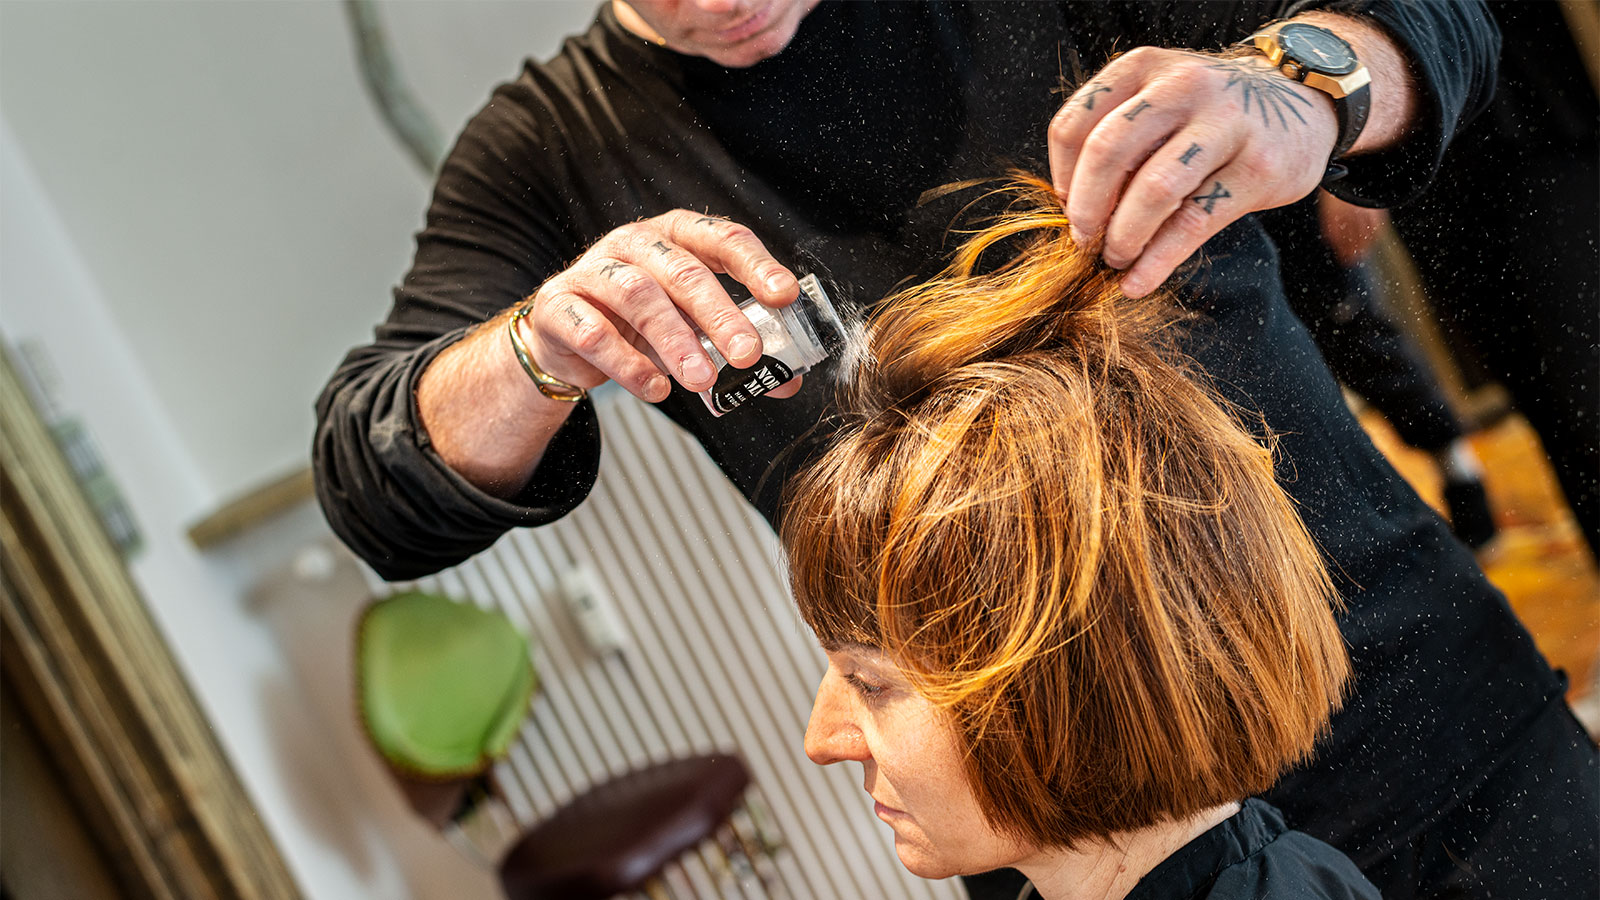 Mauro Basso performs a treatment on a client's hair